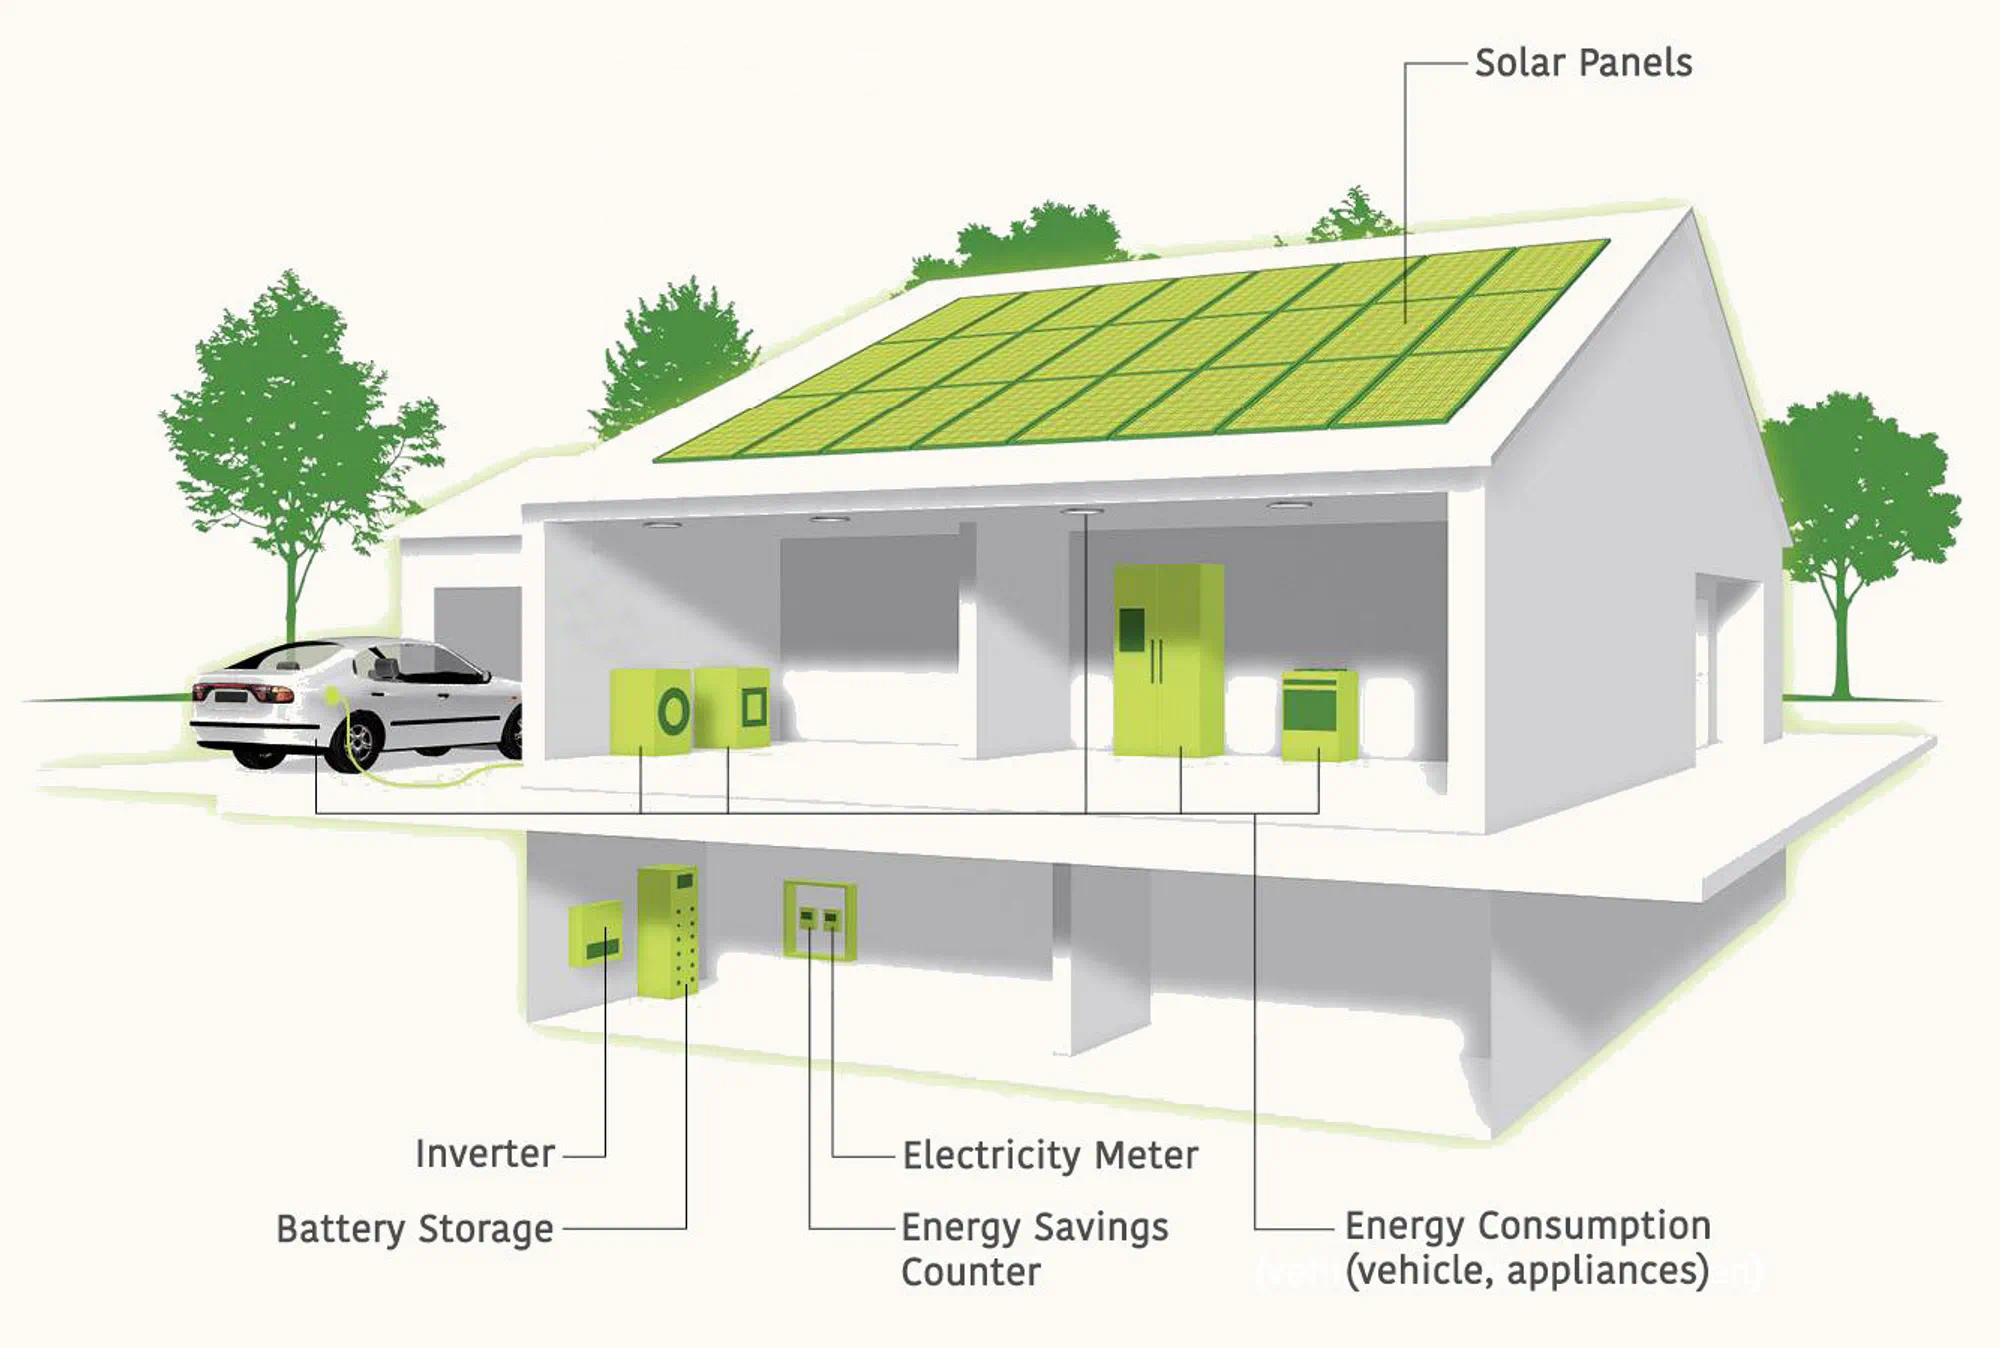 This image is a conceptual illustration of a home solar power system. The diagram shows a single-story house with a solar panel array on the roof. Labeled components include the solar panels, an inverter, battery storage, an electricity meter, and an energy savings counter. The illustration also depicts energy consumption for both a vehicle, indicated by a car connected to the system with a green line, and household appliances. Trees are shown in the background, suggesting an eco-friendly environment. The color coding in green highlights the elements related to energy efficiency and storage.